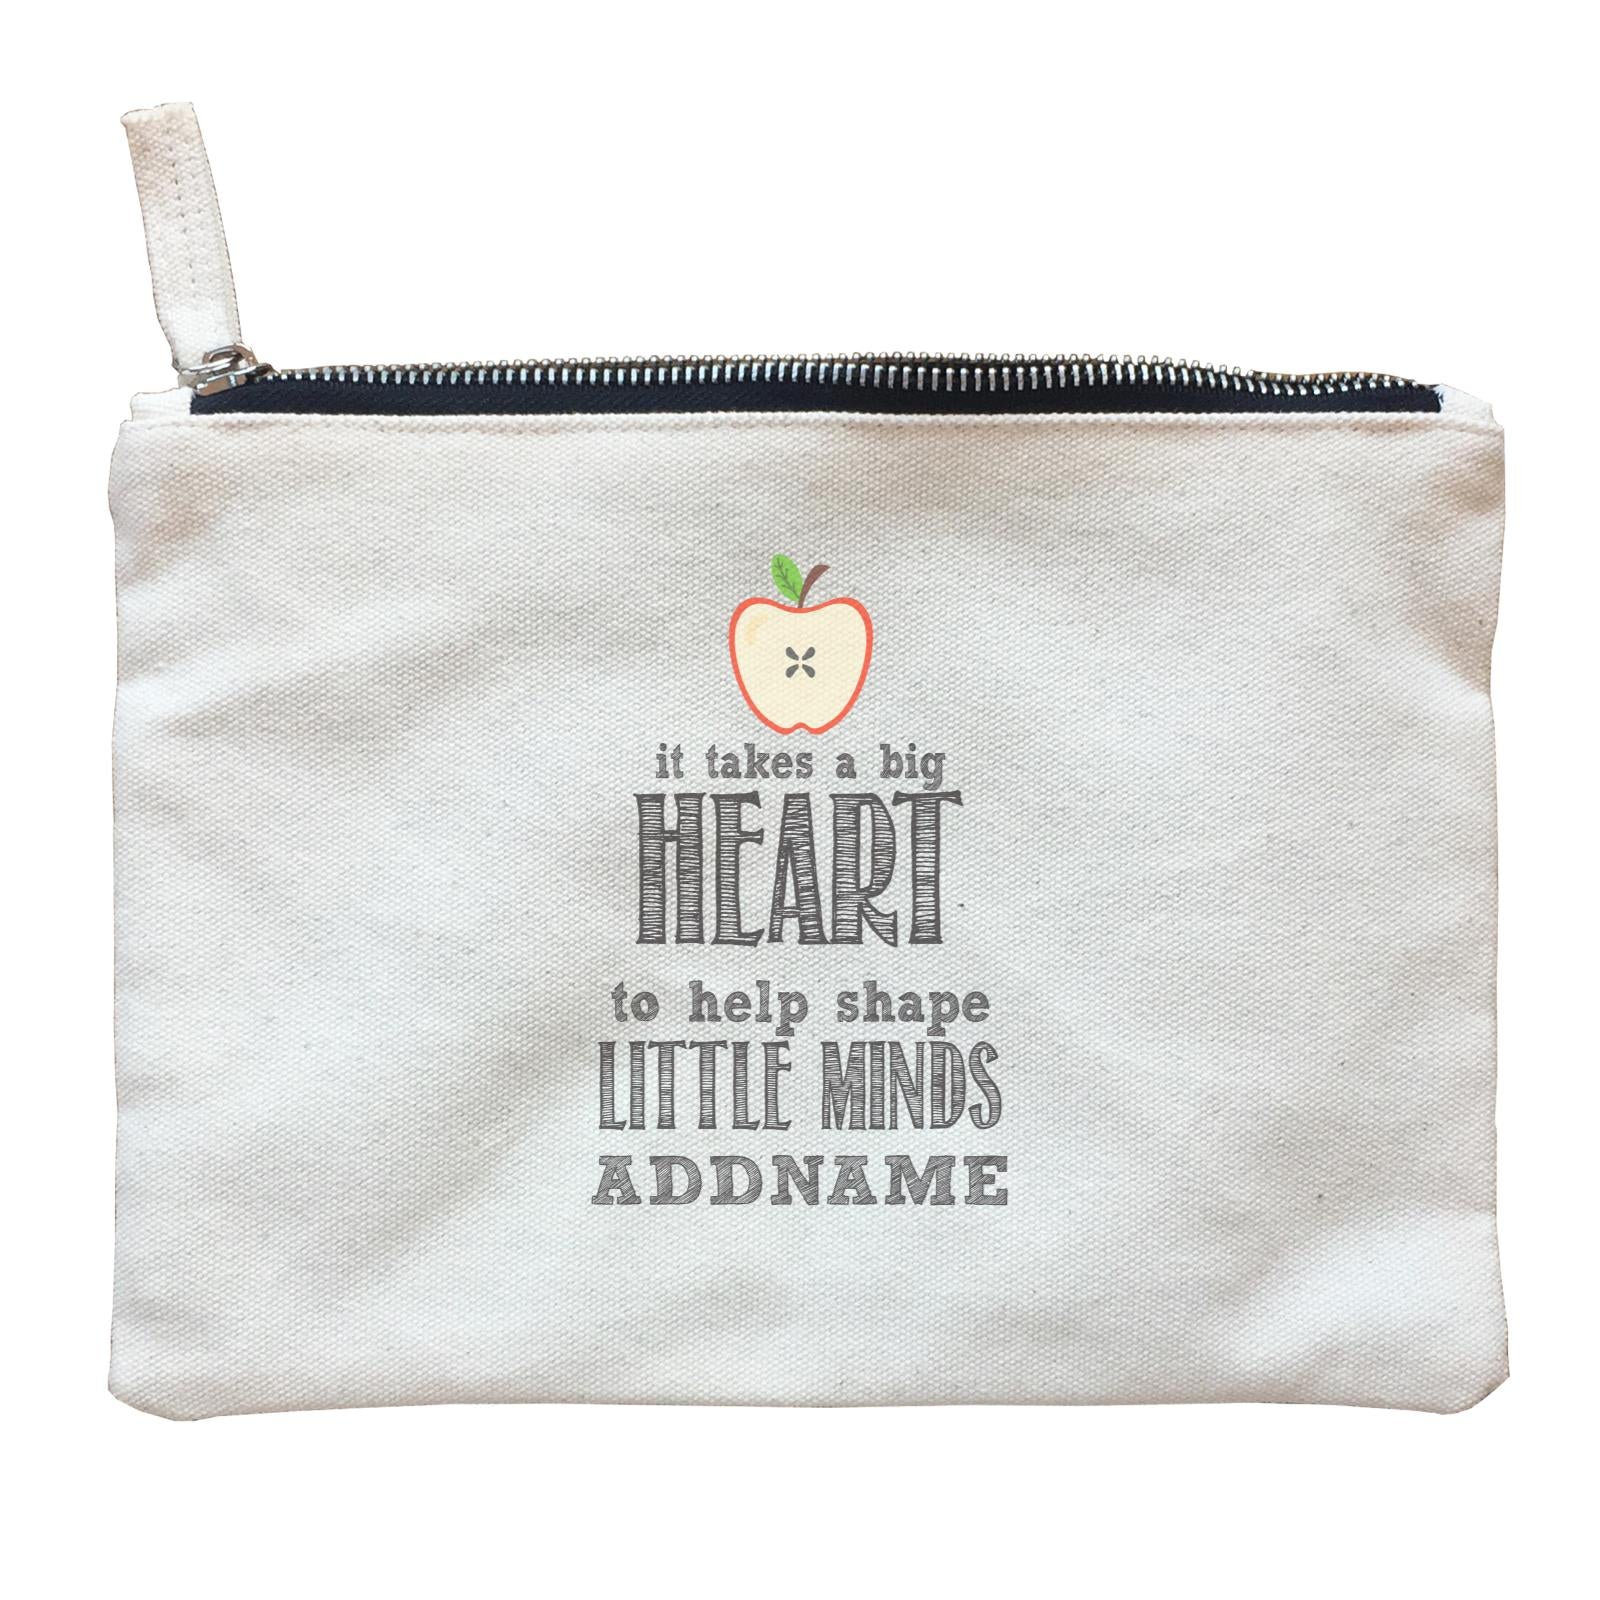 Inspiration Quotes Apple It Takes A Big Heart To Help Shape Little Minds Addname Zipper Pouch